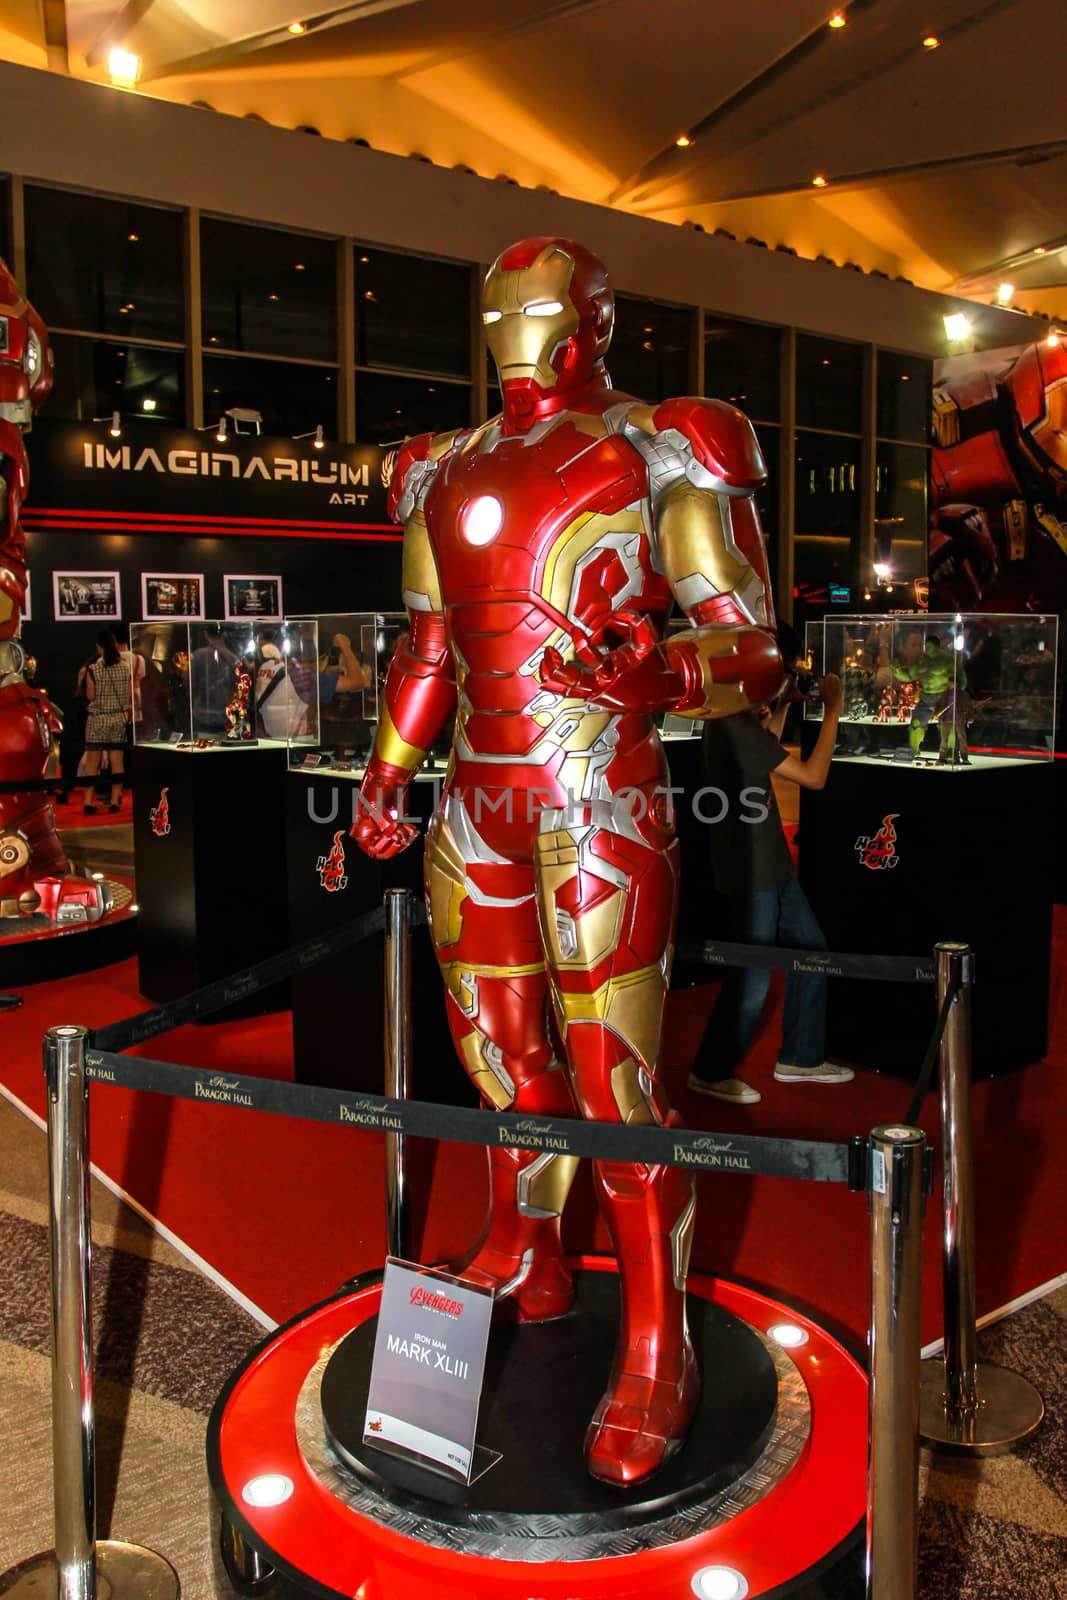 A model of the character Iron Man from the movies and comics by redthirteen